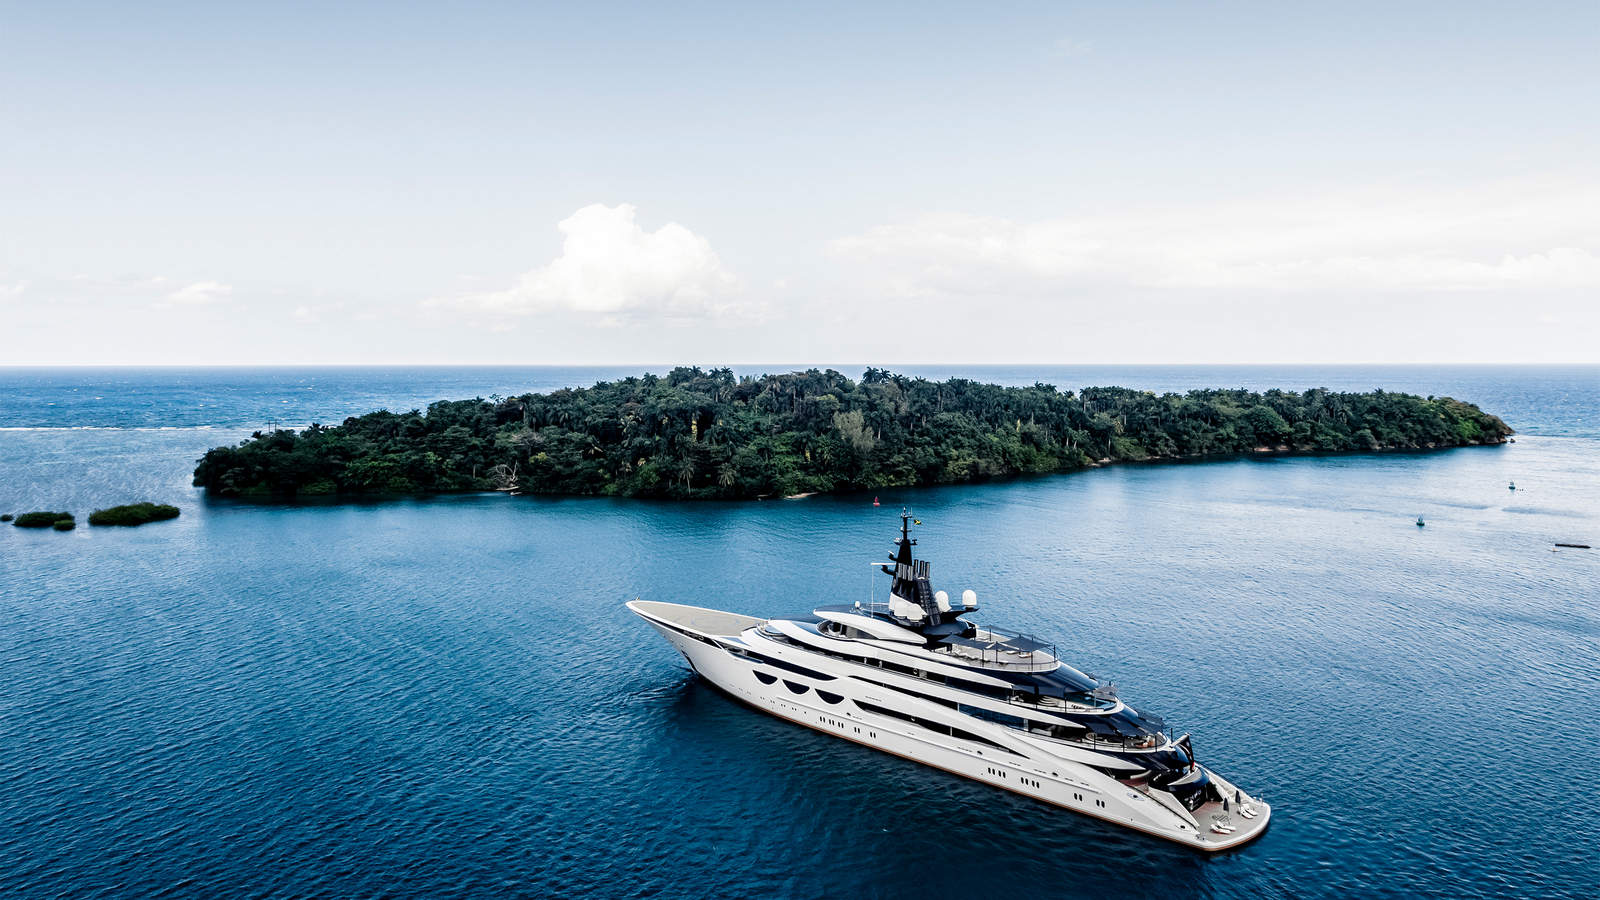 Michael Lee-Chin's $300 million superyacht is a floating five star resort.  One of the first black billionaires on the Forbes list, he once cleaned  engine rooms on a cruise ship and now